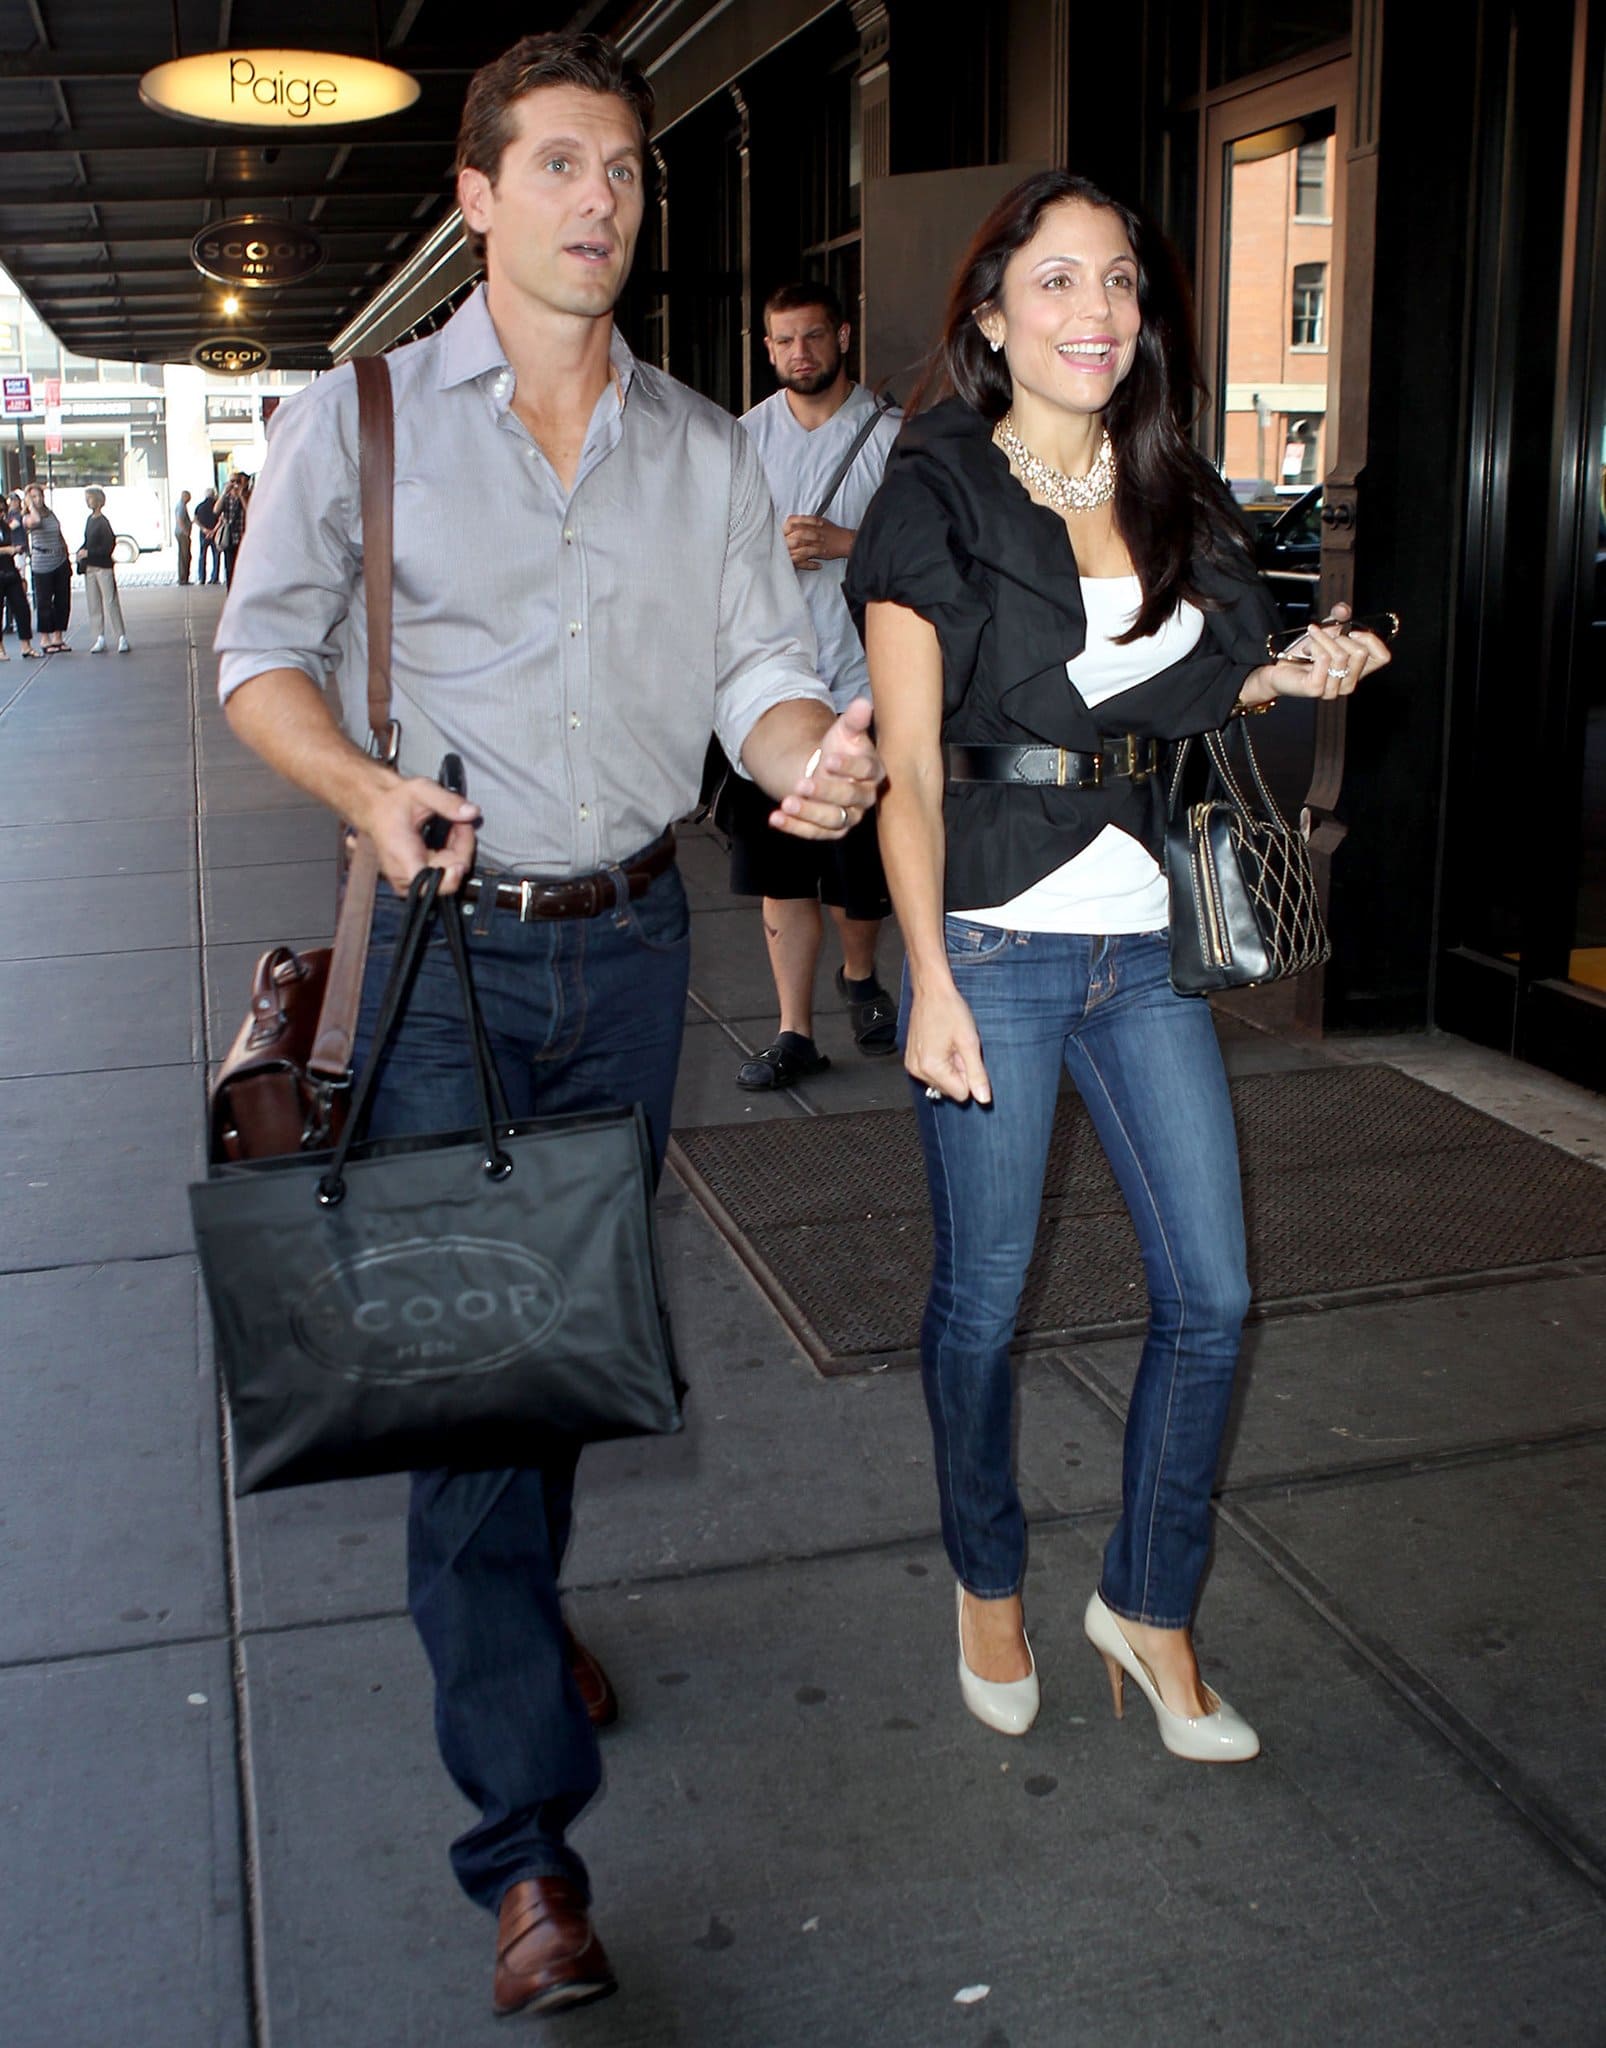 Jason Hoppy and Bethenny Frankel married in 2010 and filed for divorce three years later in 2013